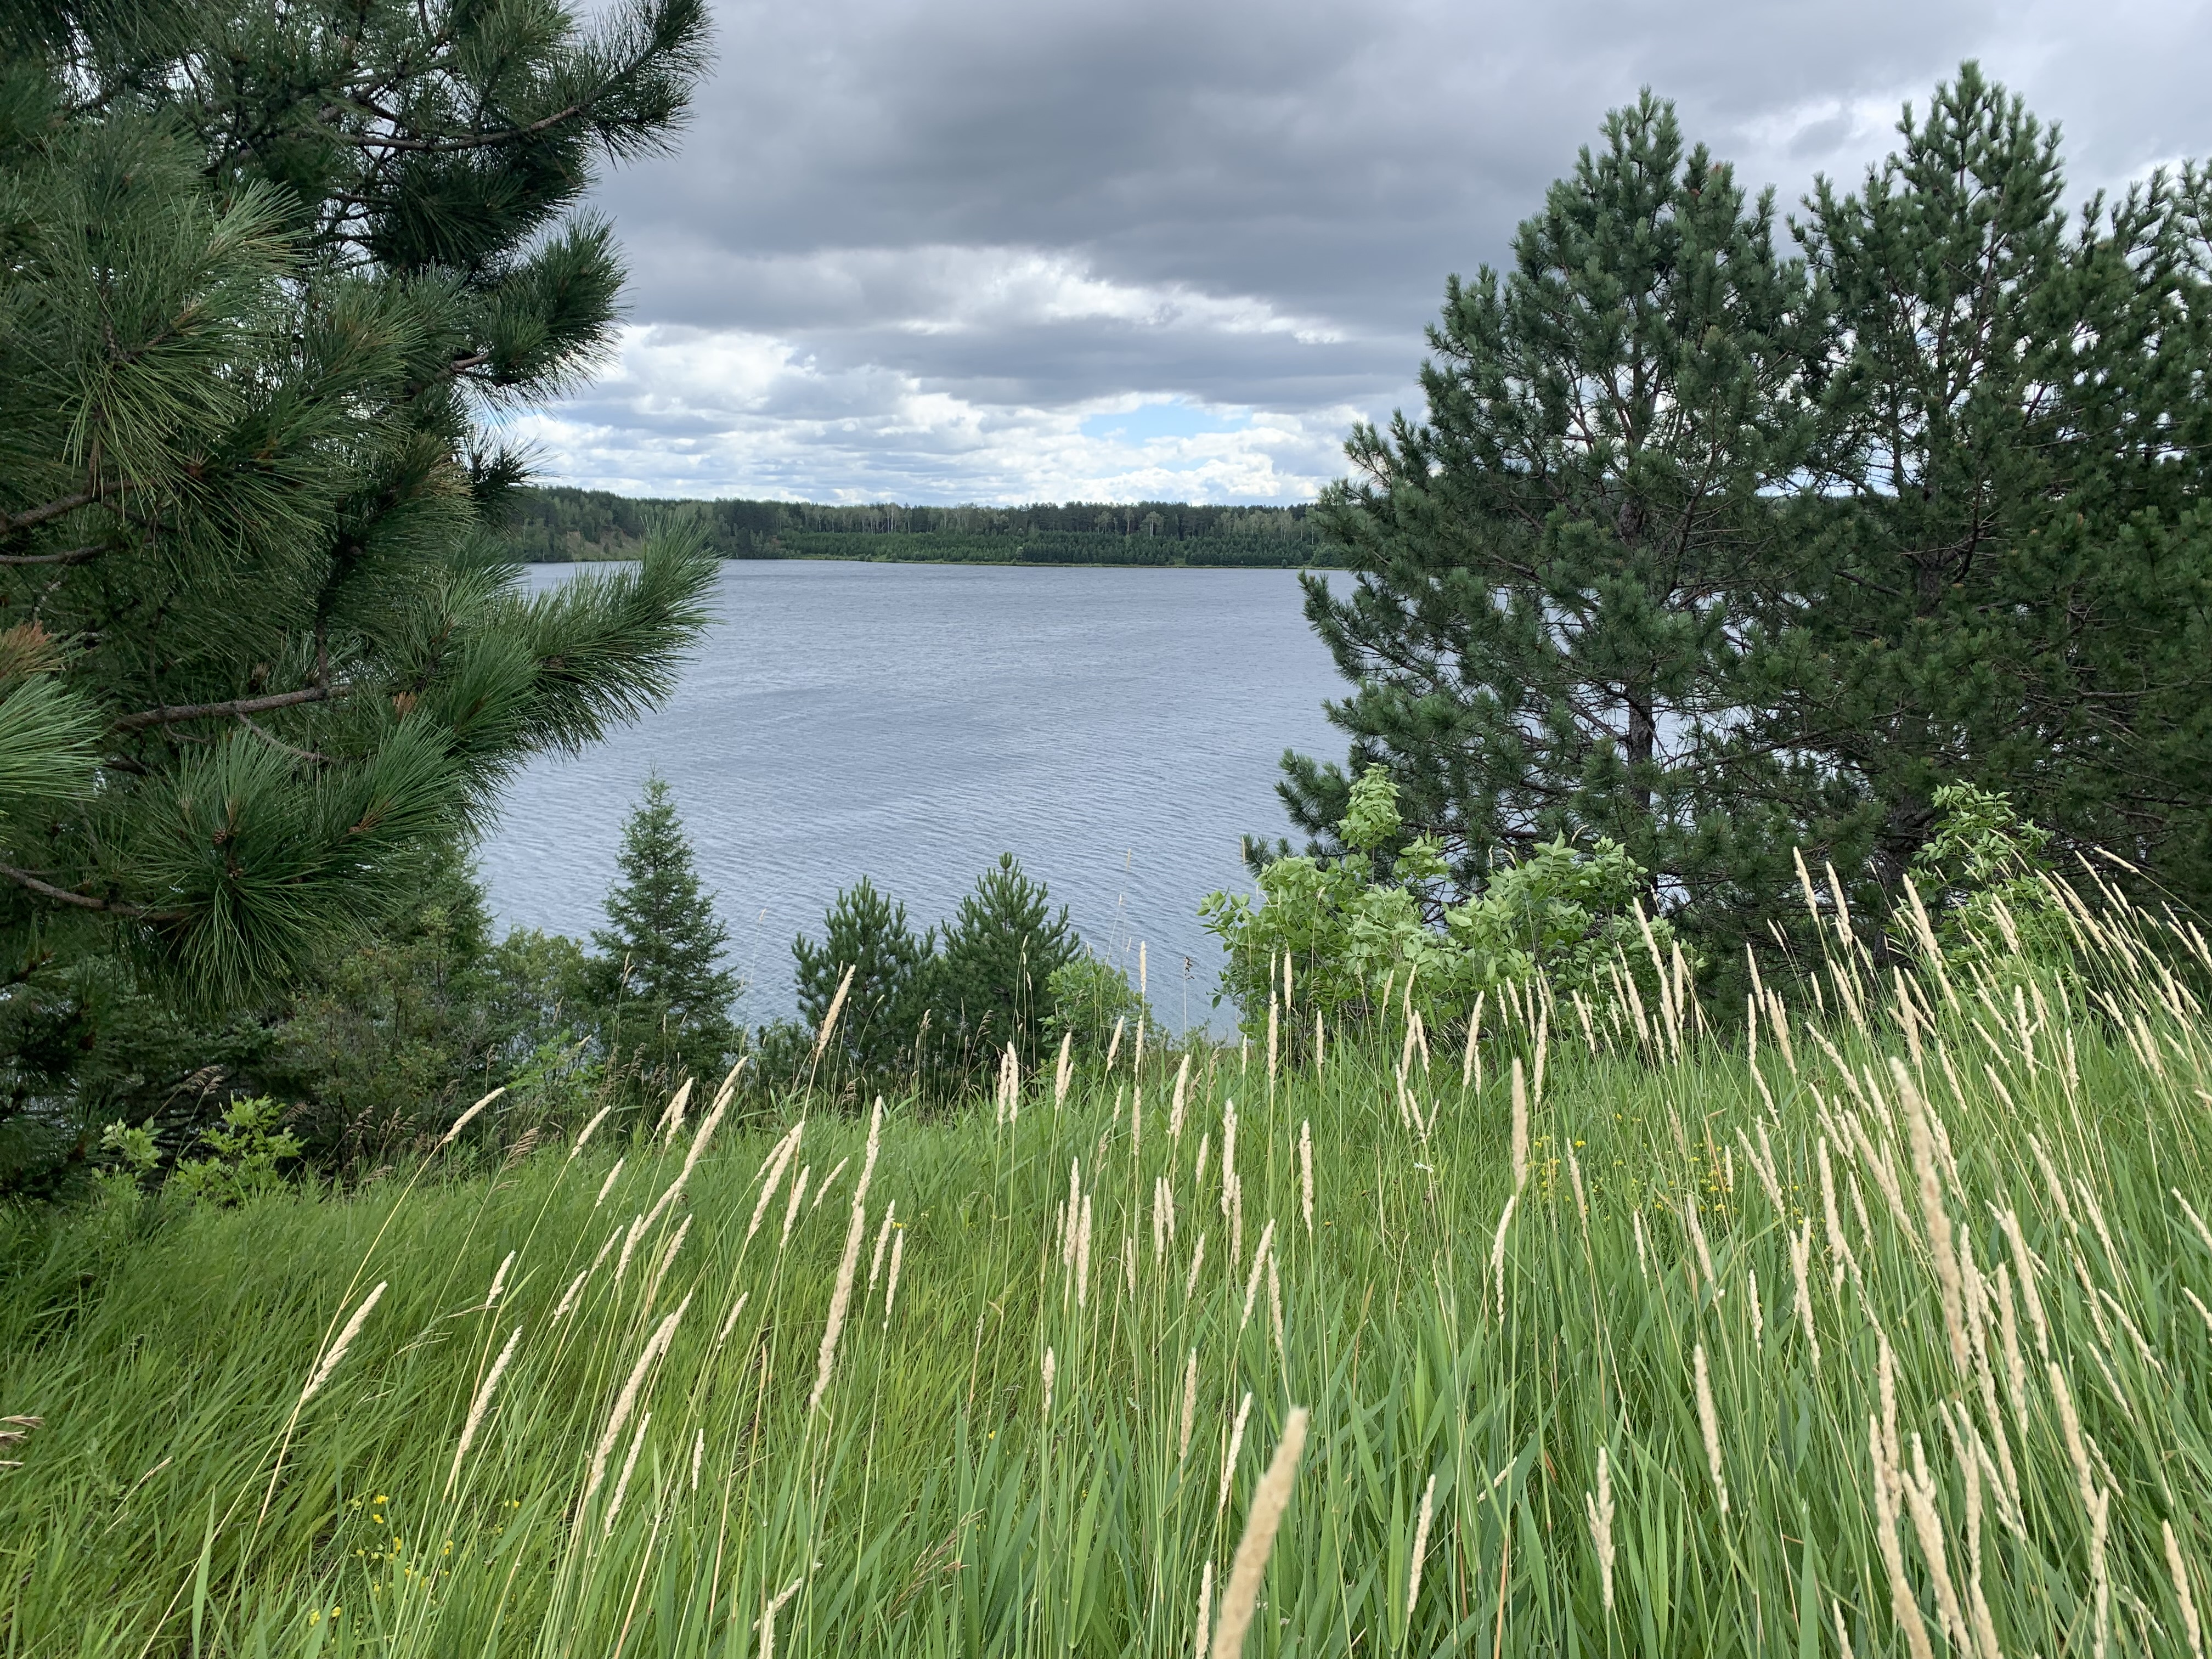 Lake in background framed by trees and tall grasses in foreground.